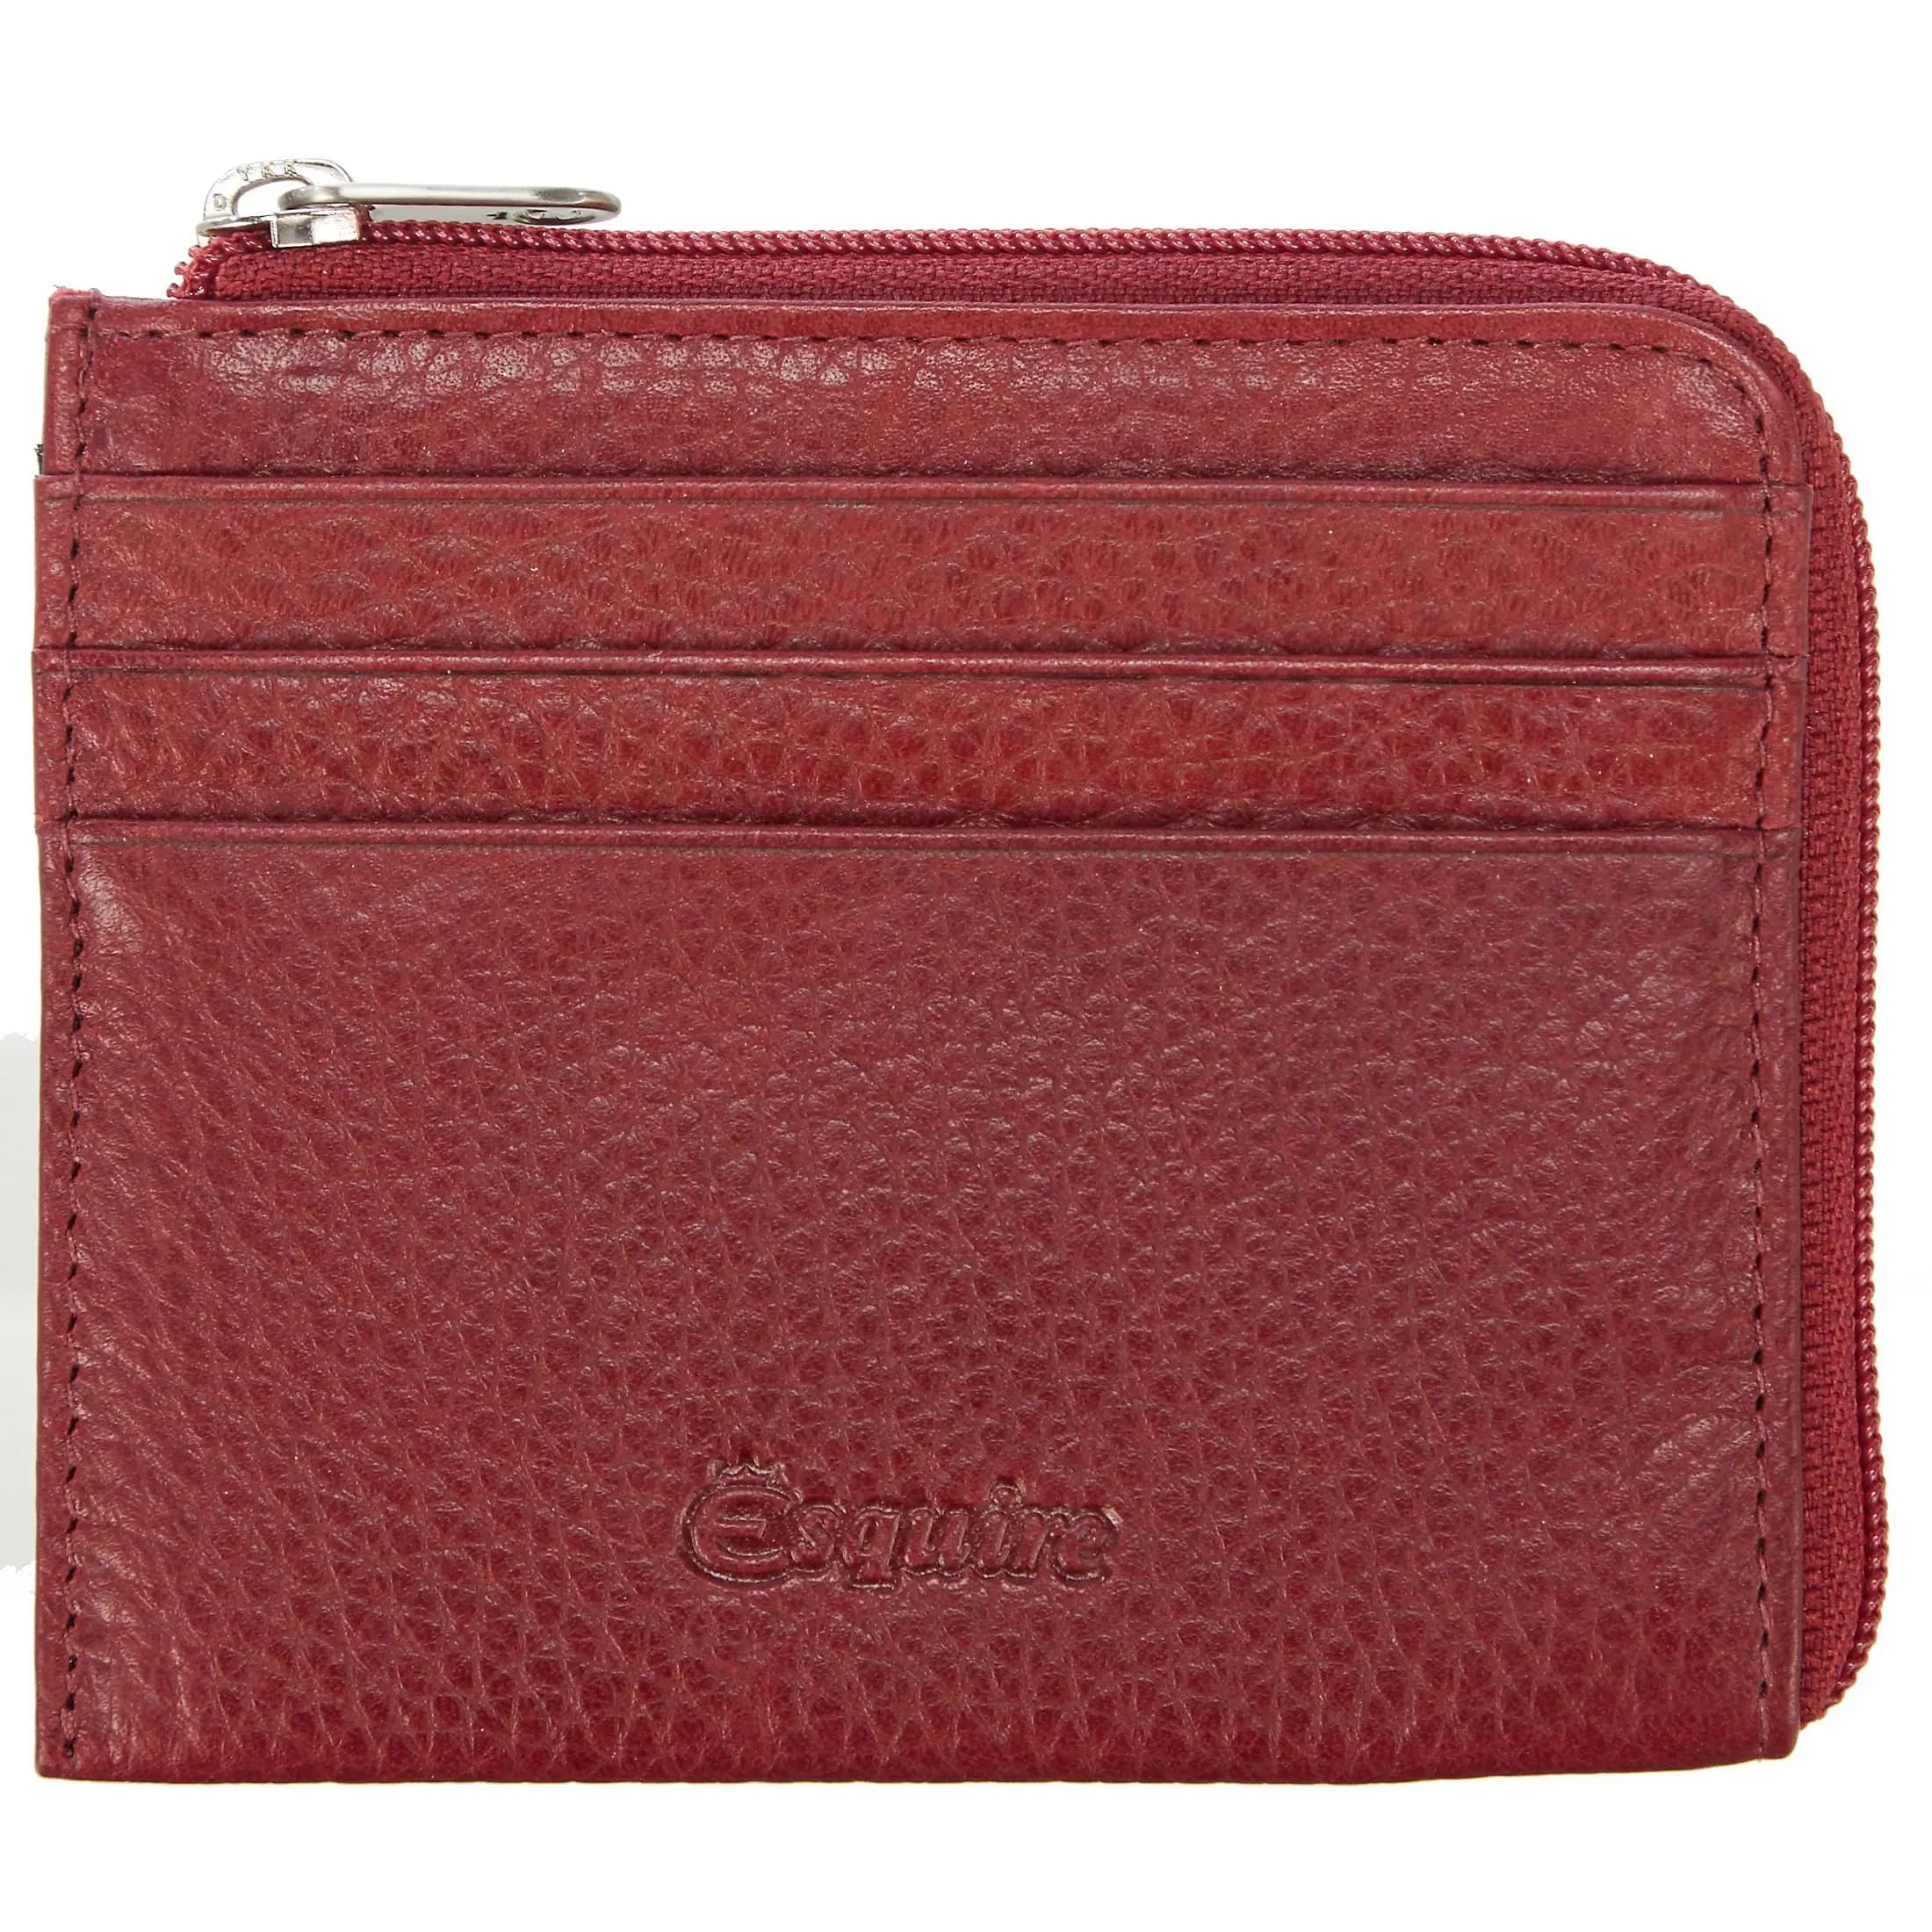 Esquire Oslo Texas credit card holder with RFID protection 11 cm - red